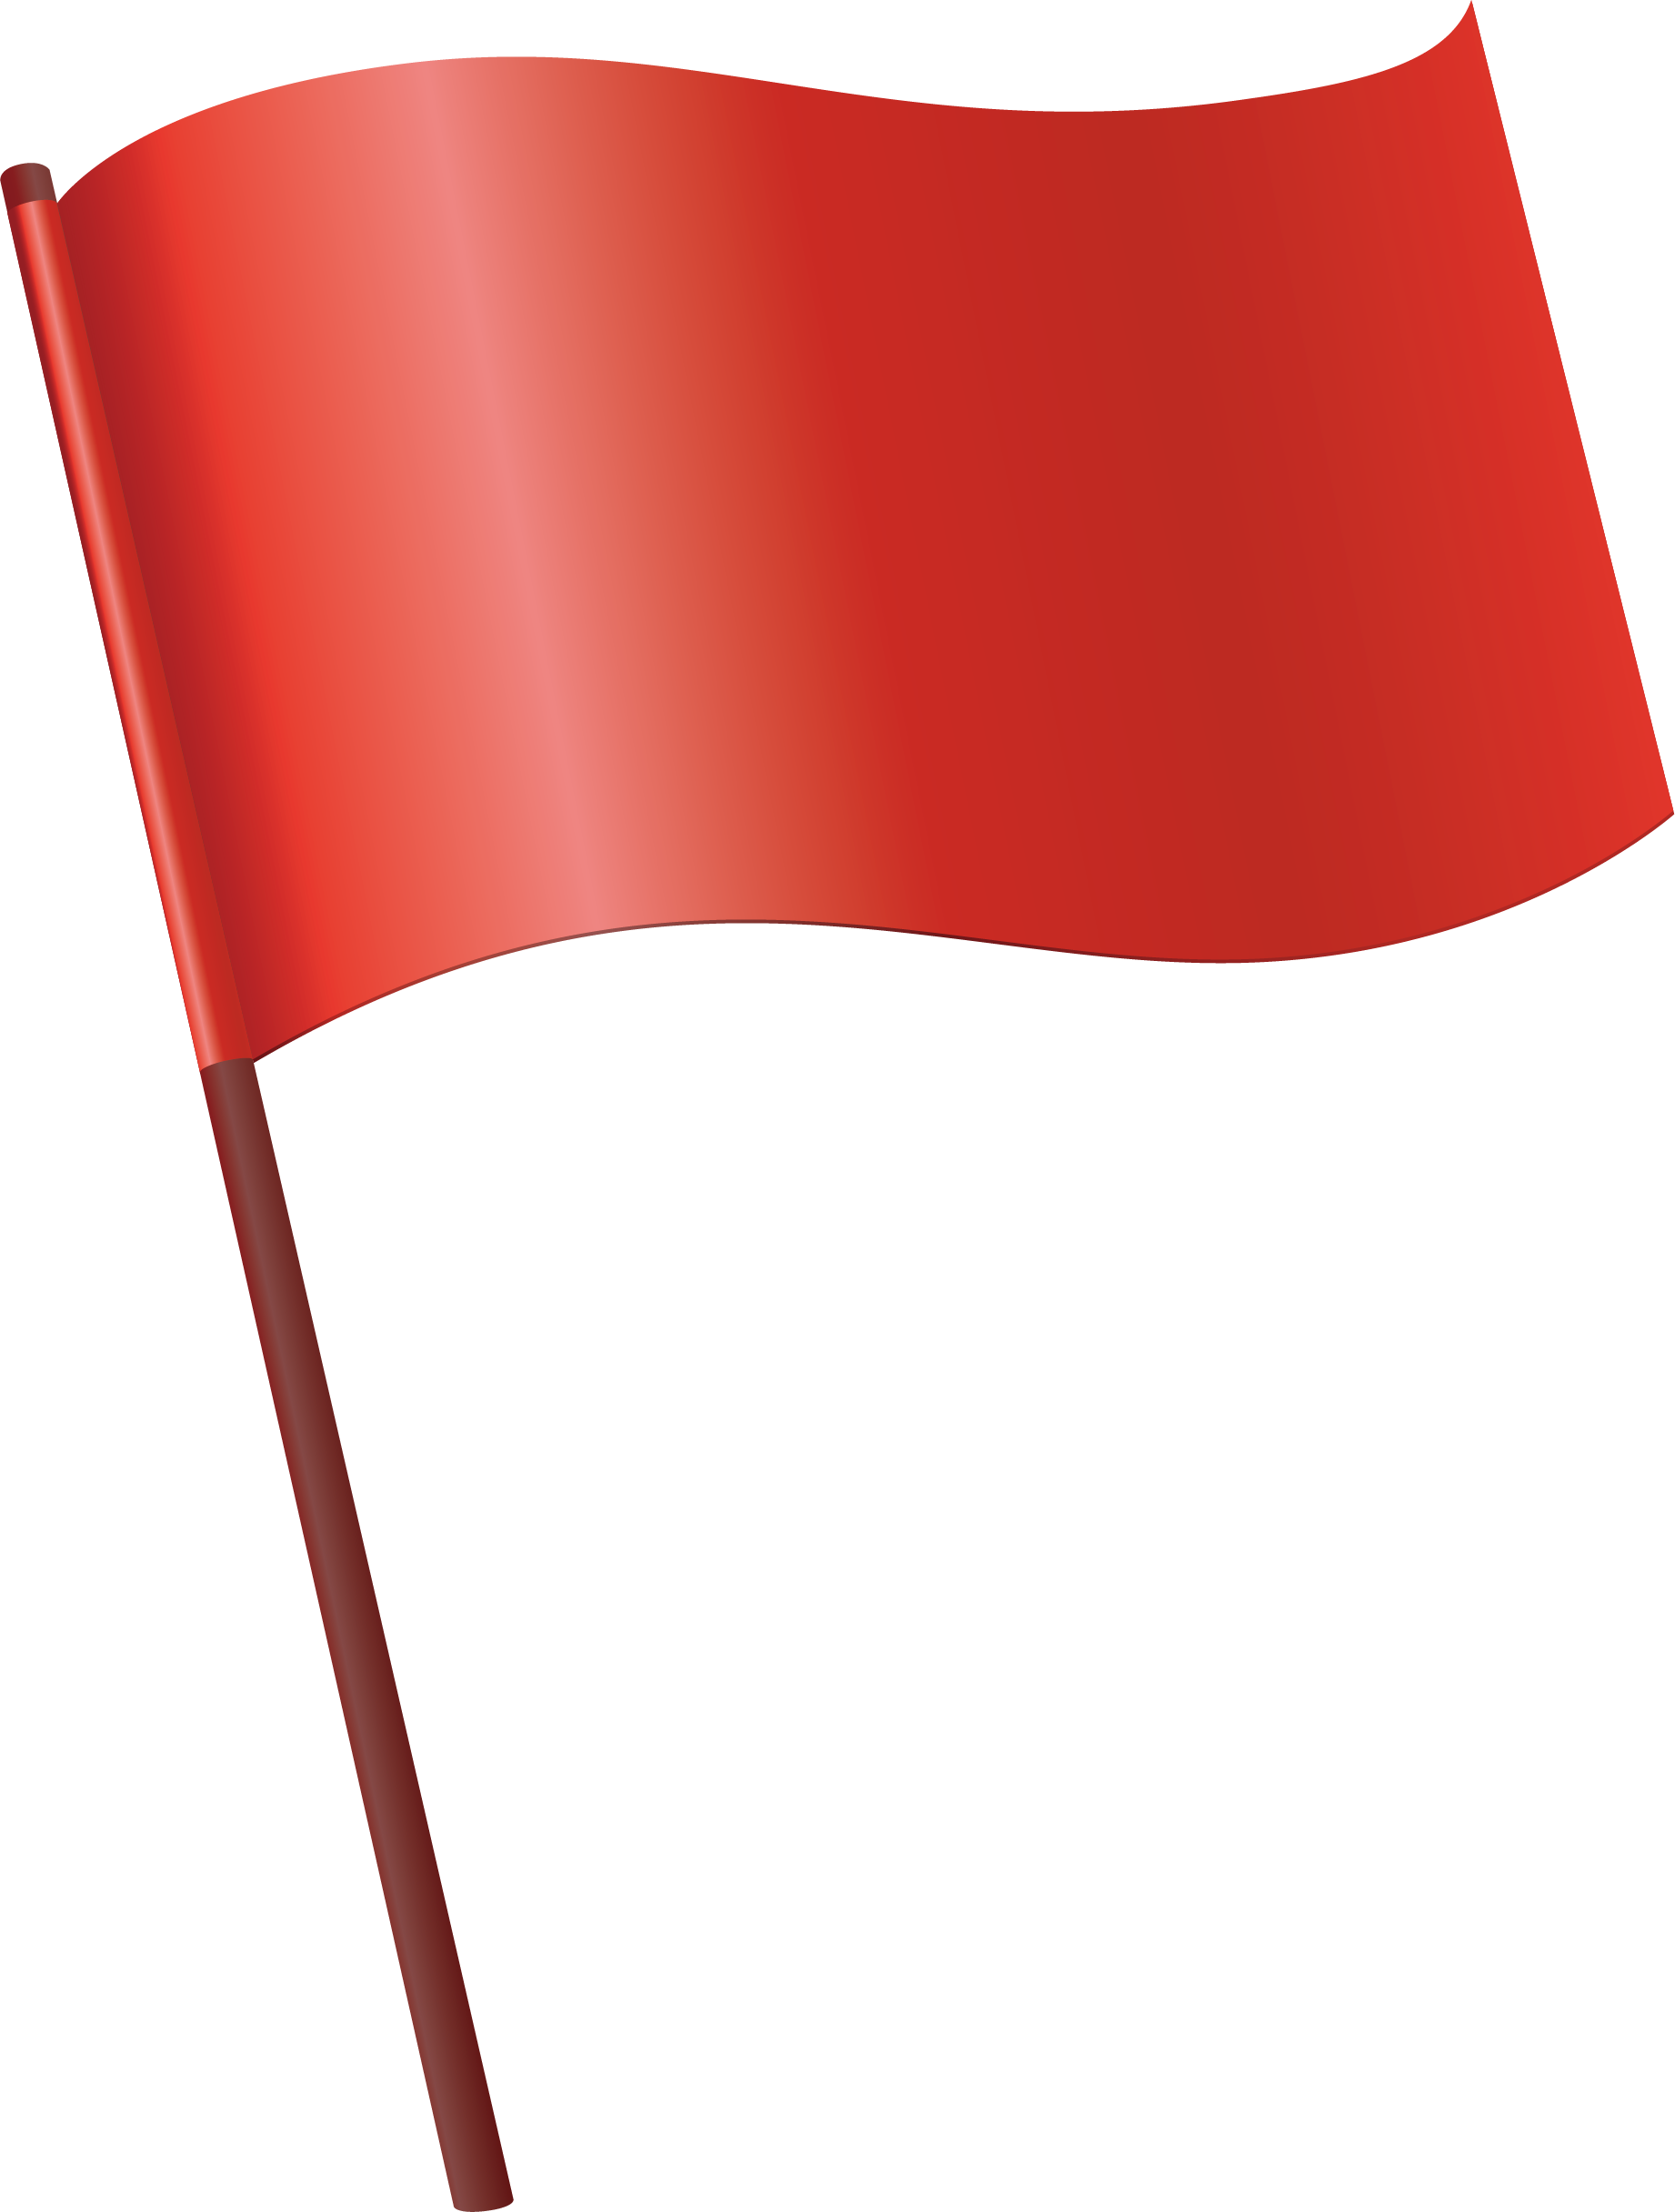 Red Flag Red Flag, Hd Png Download